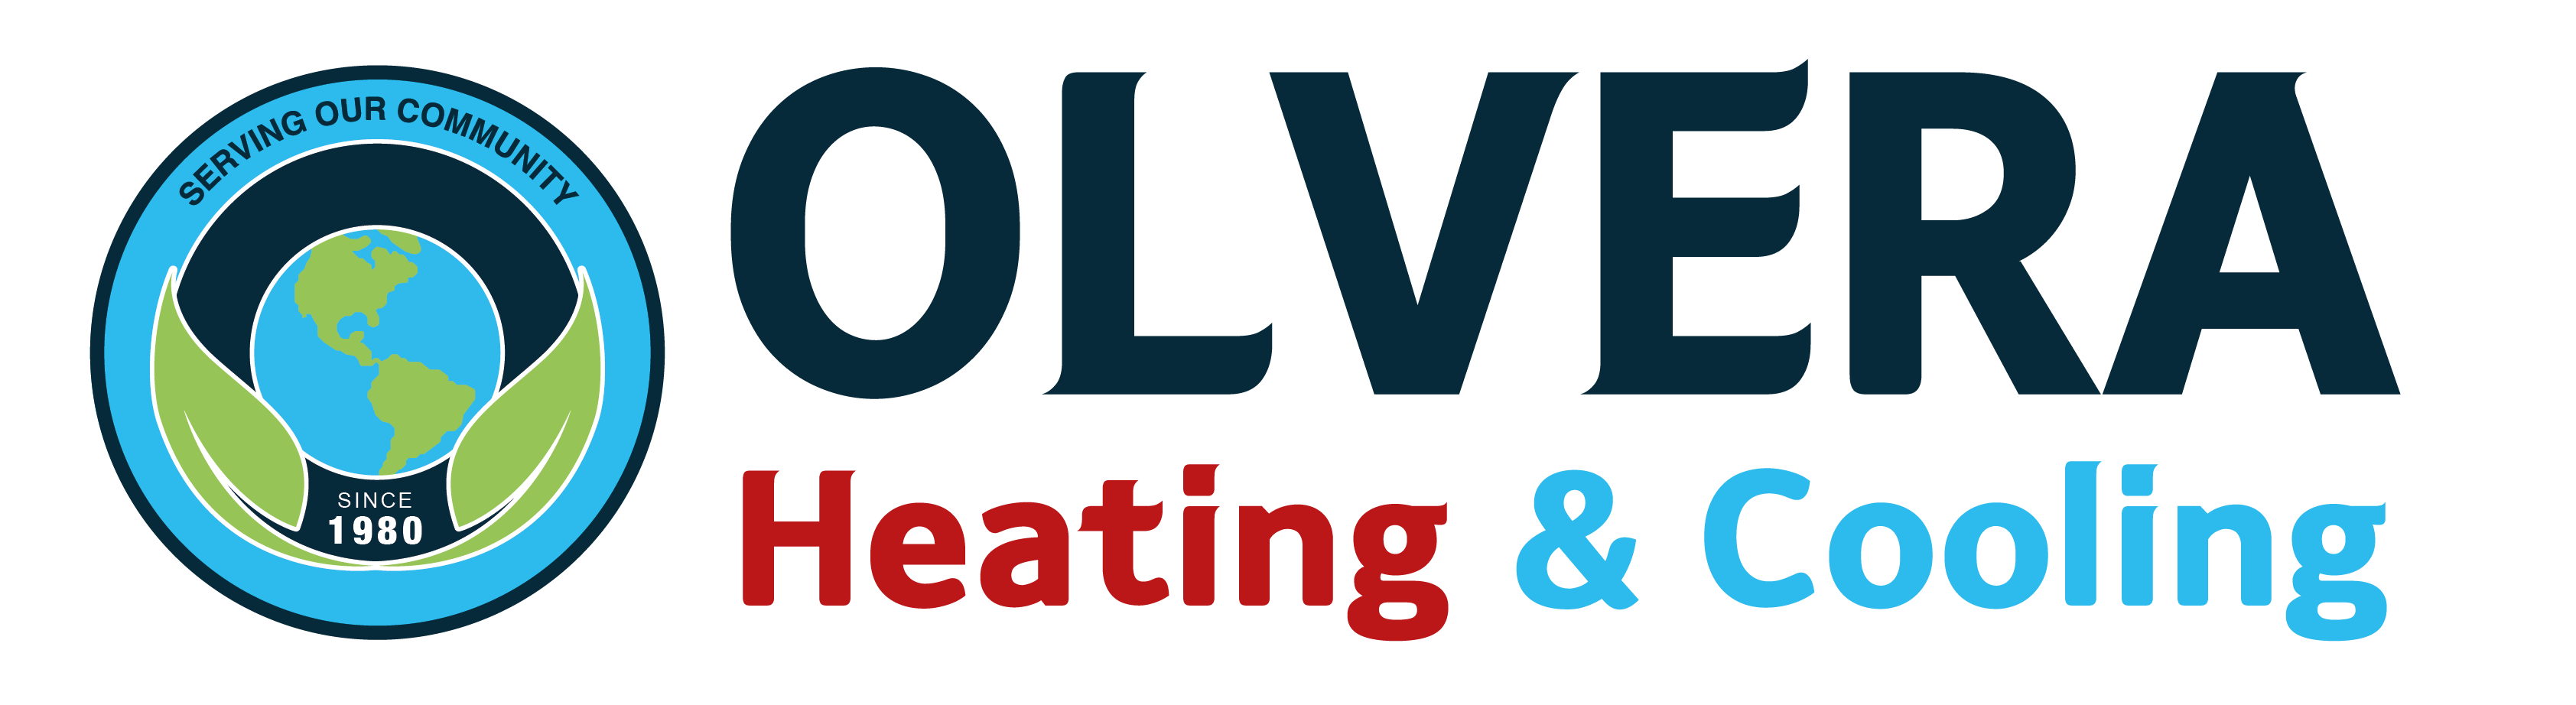 Olvera Heating & Cooling